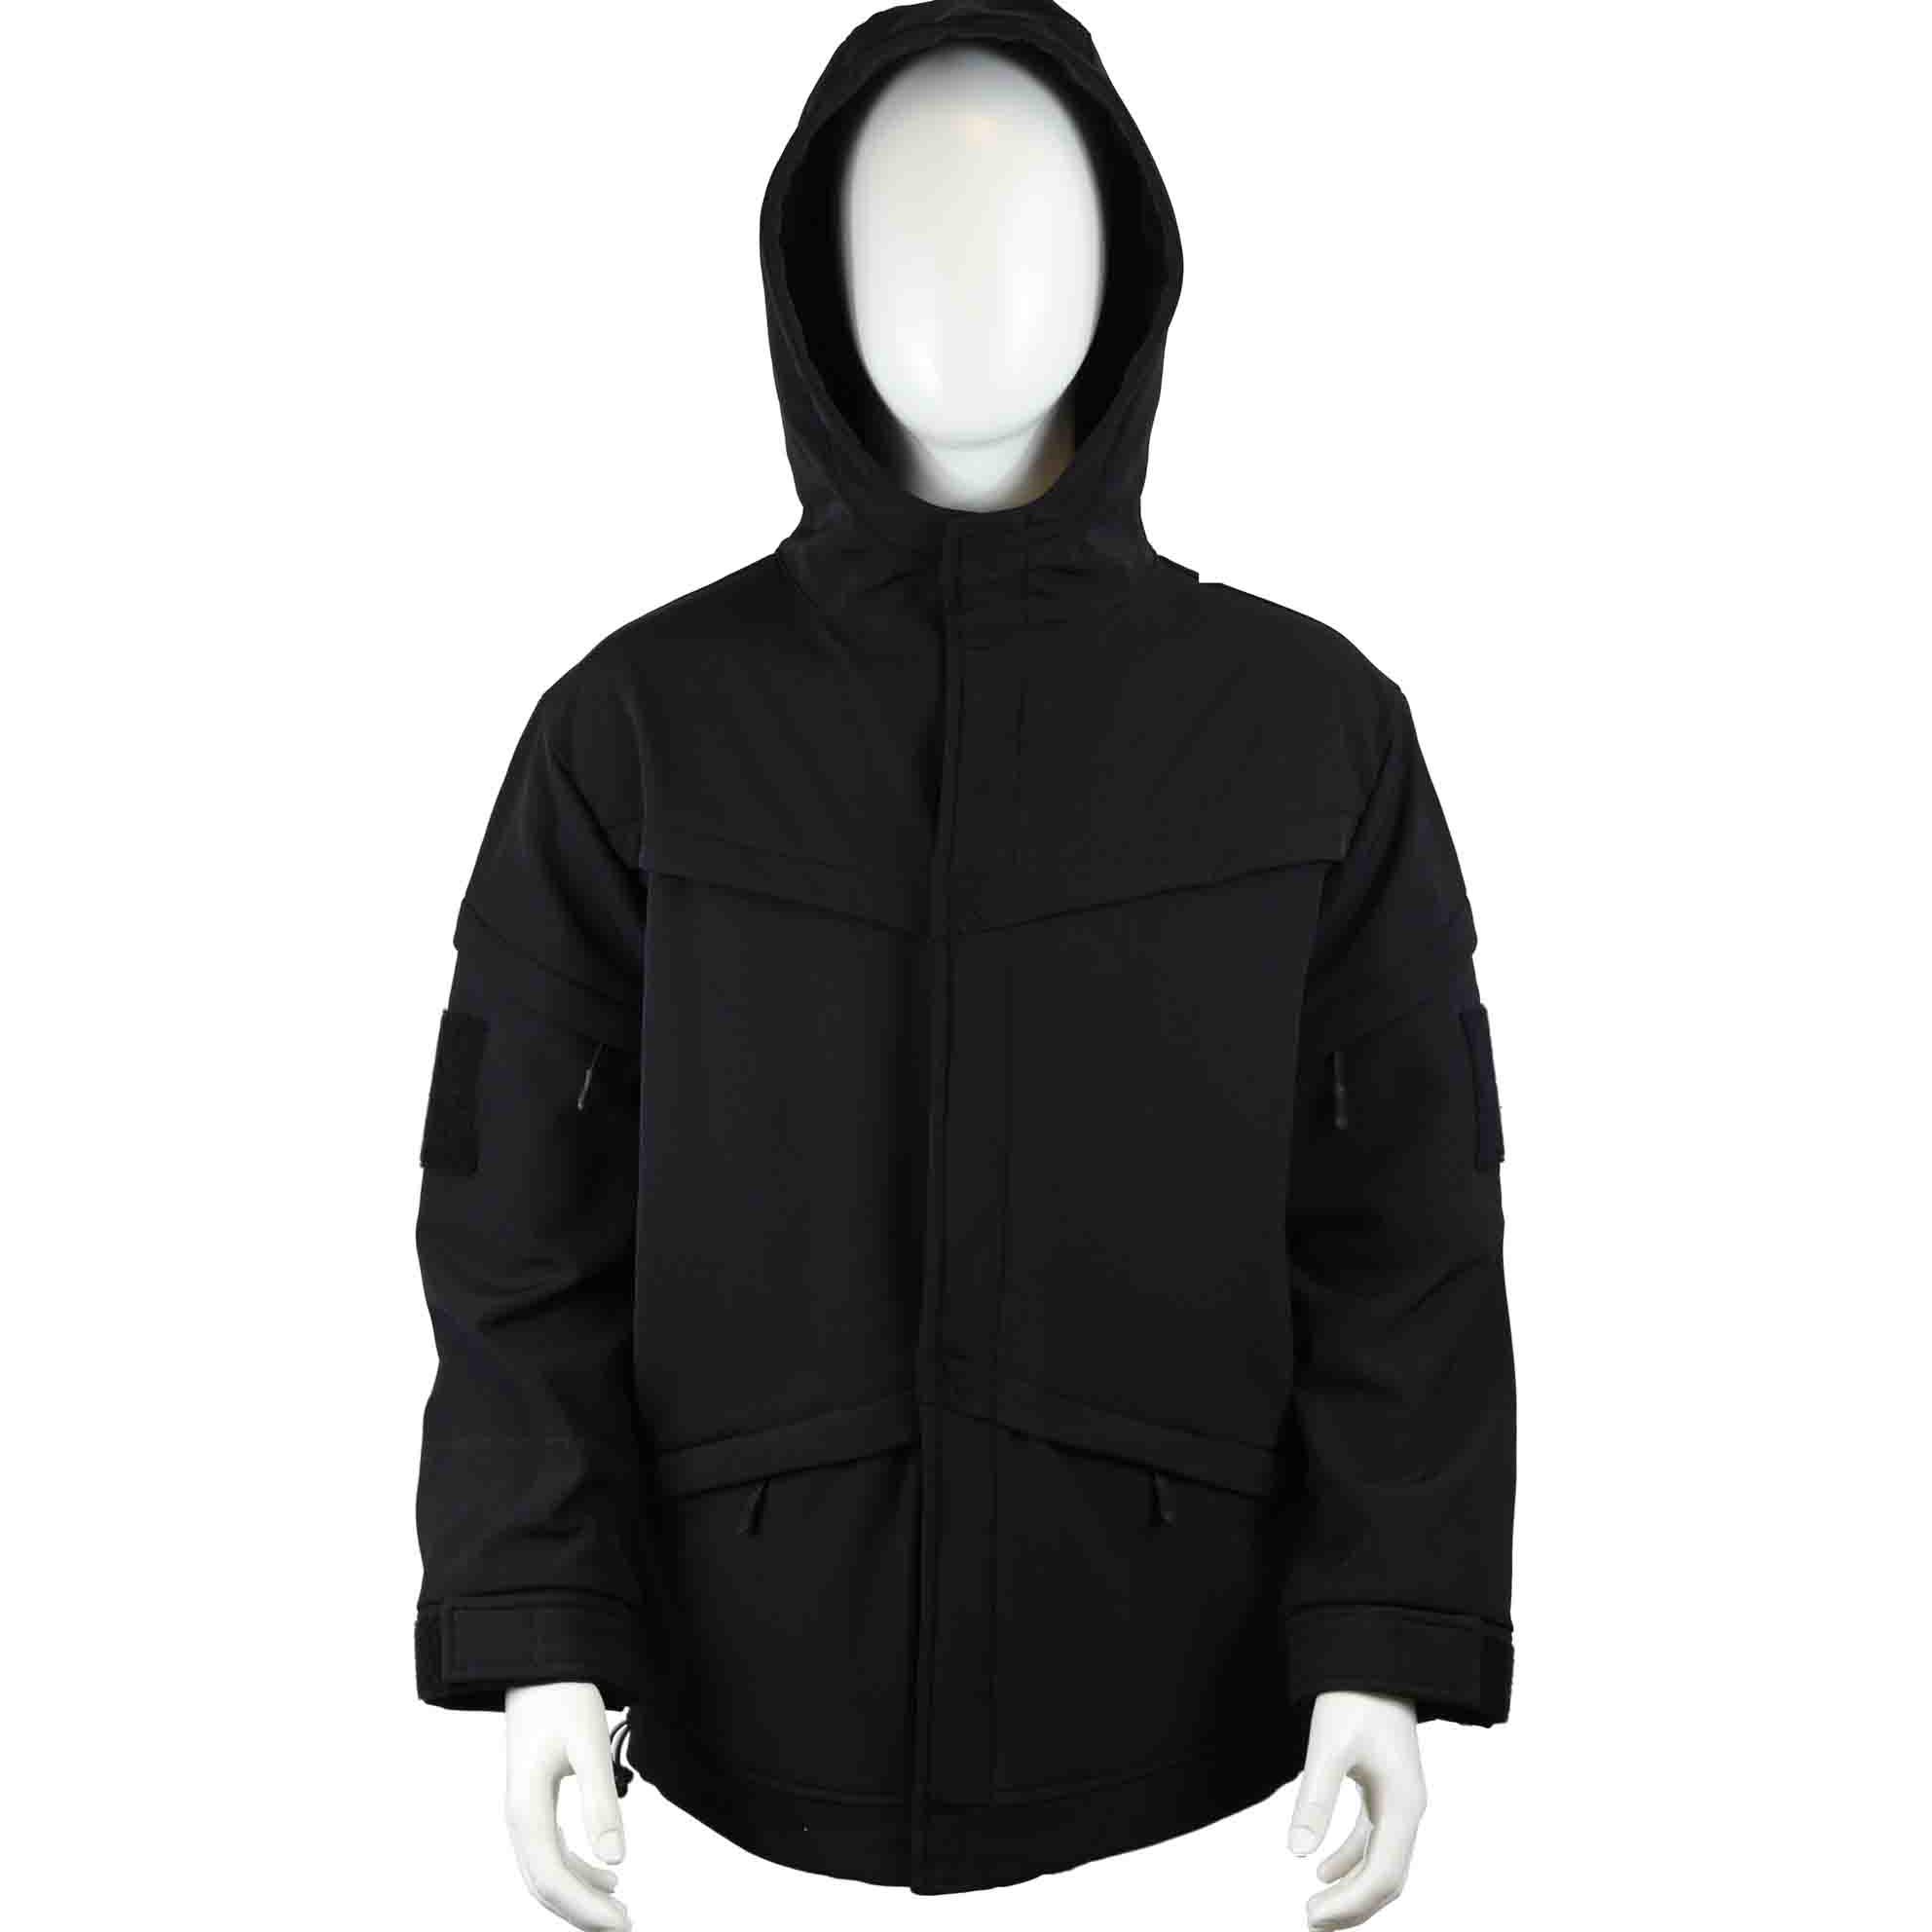 Military Waterproof and Breathable Jacket